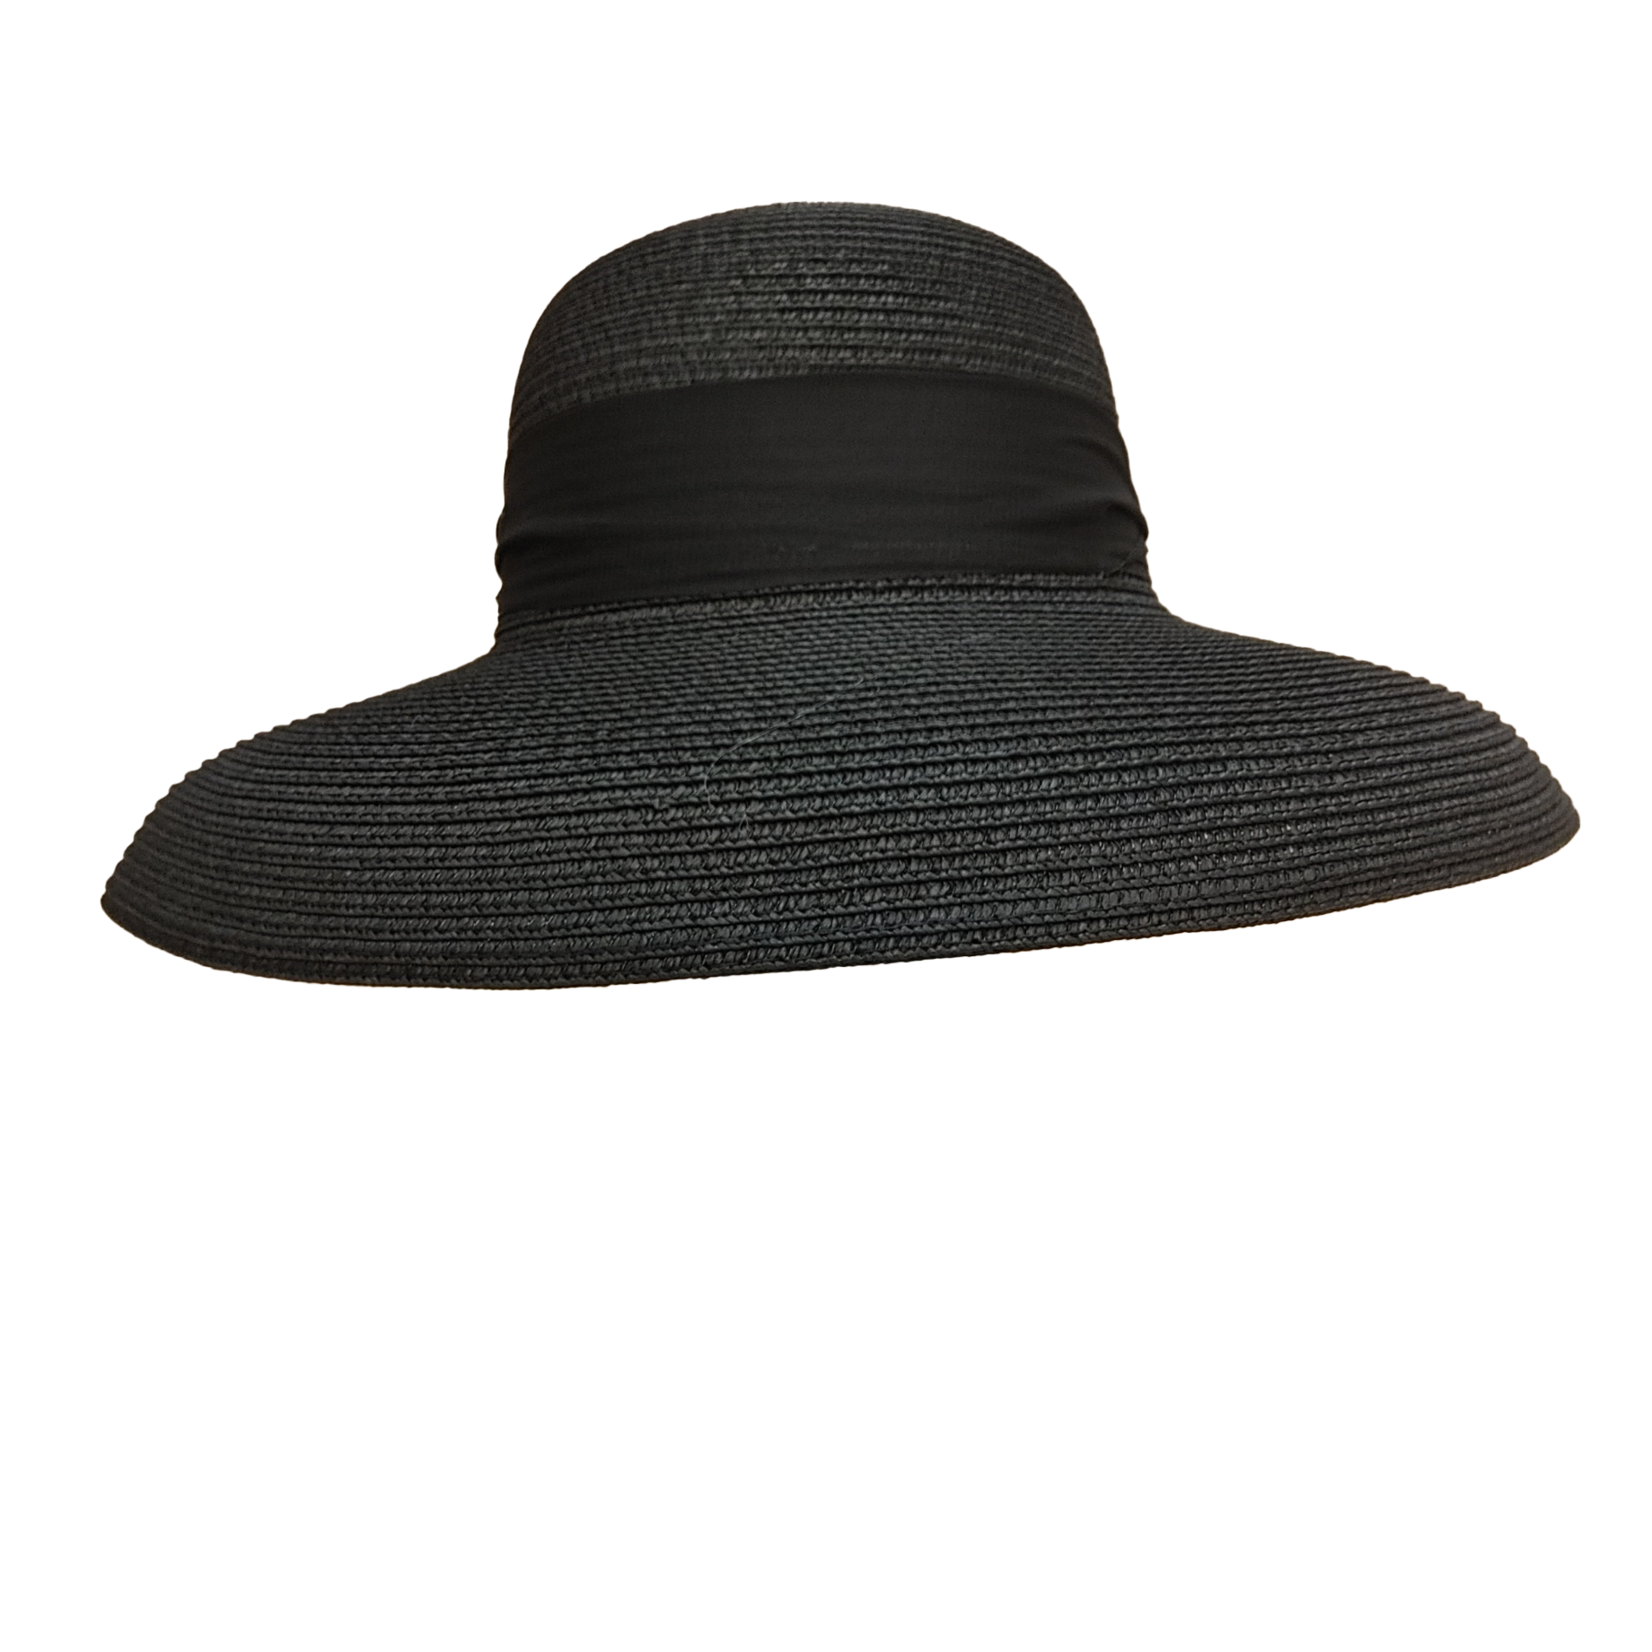 Picabo Picabo adjustable sun hat with tie